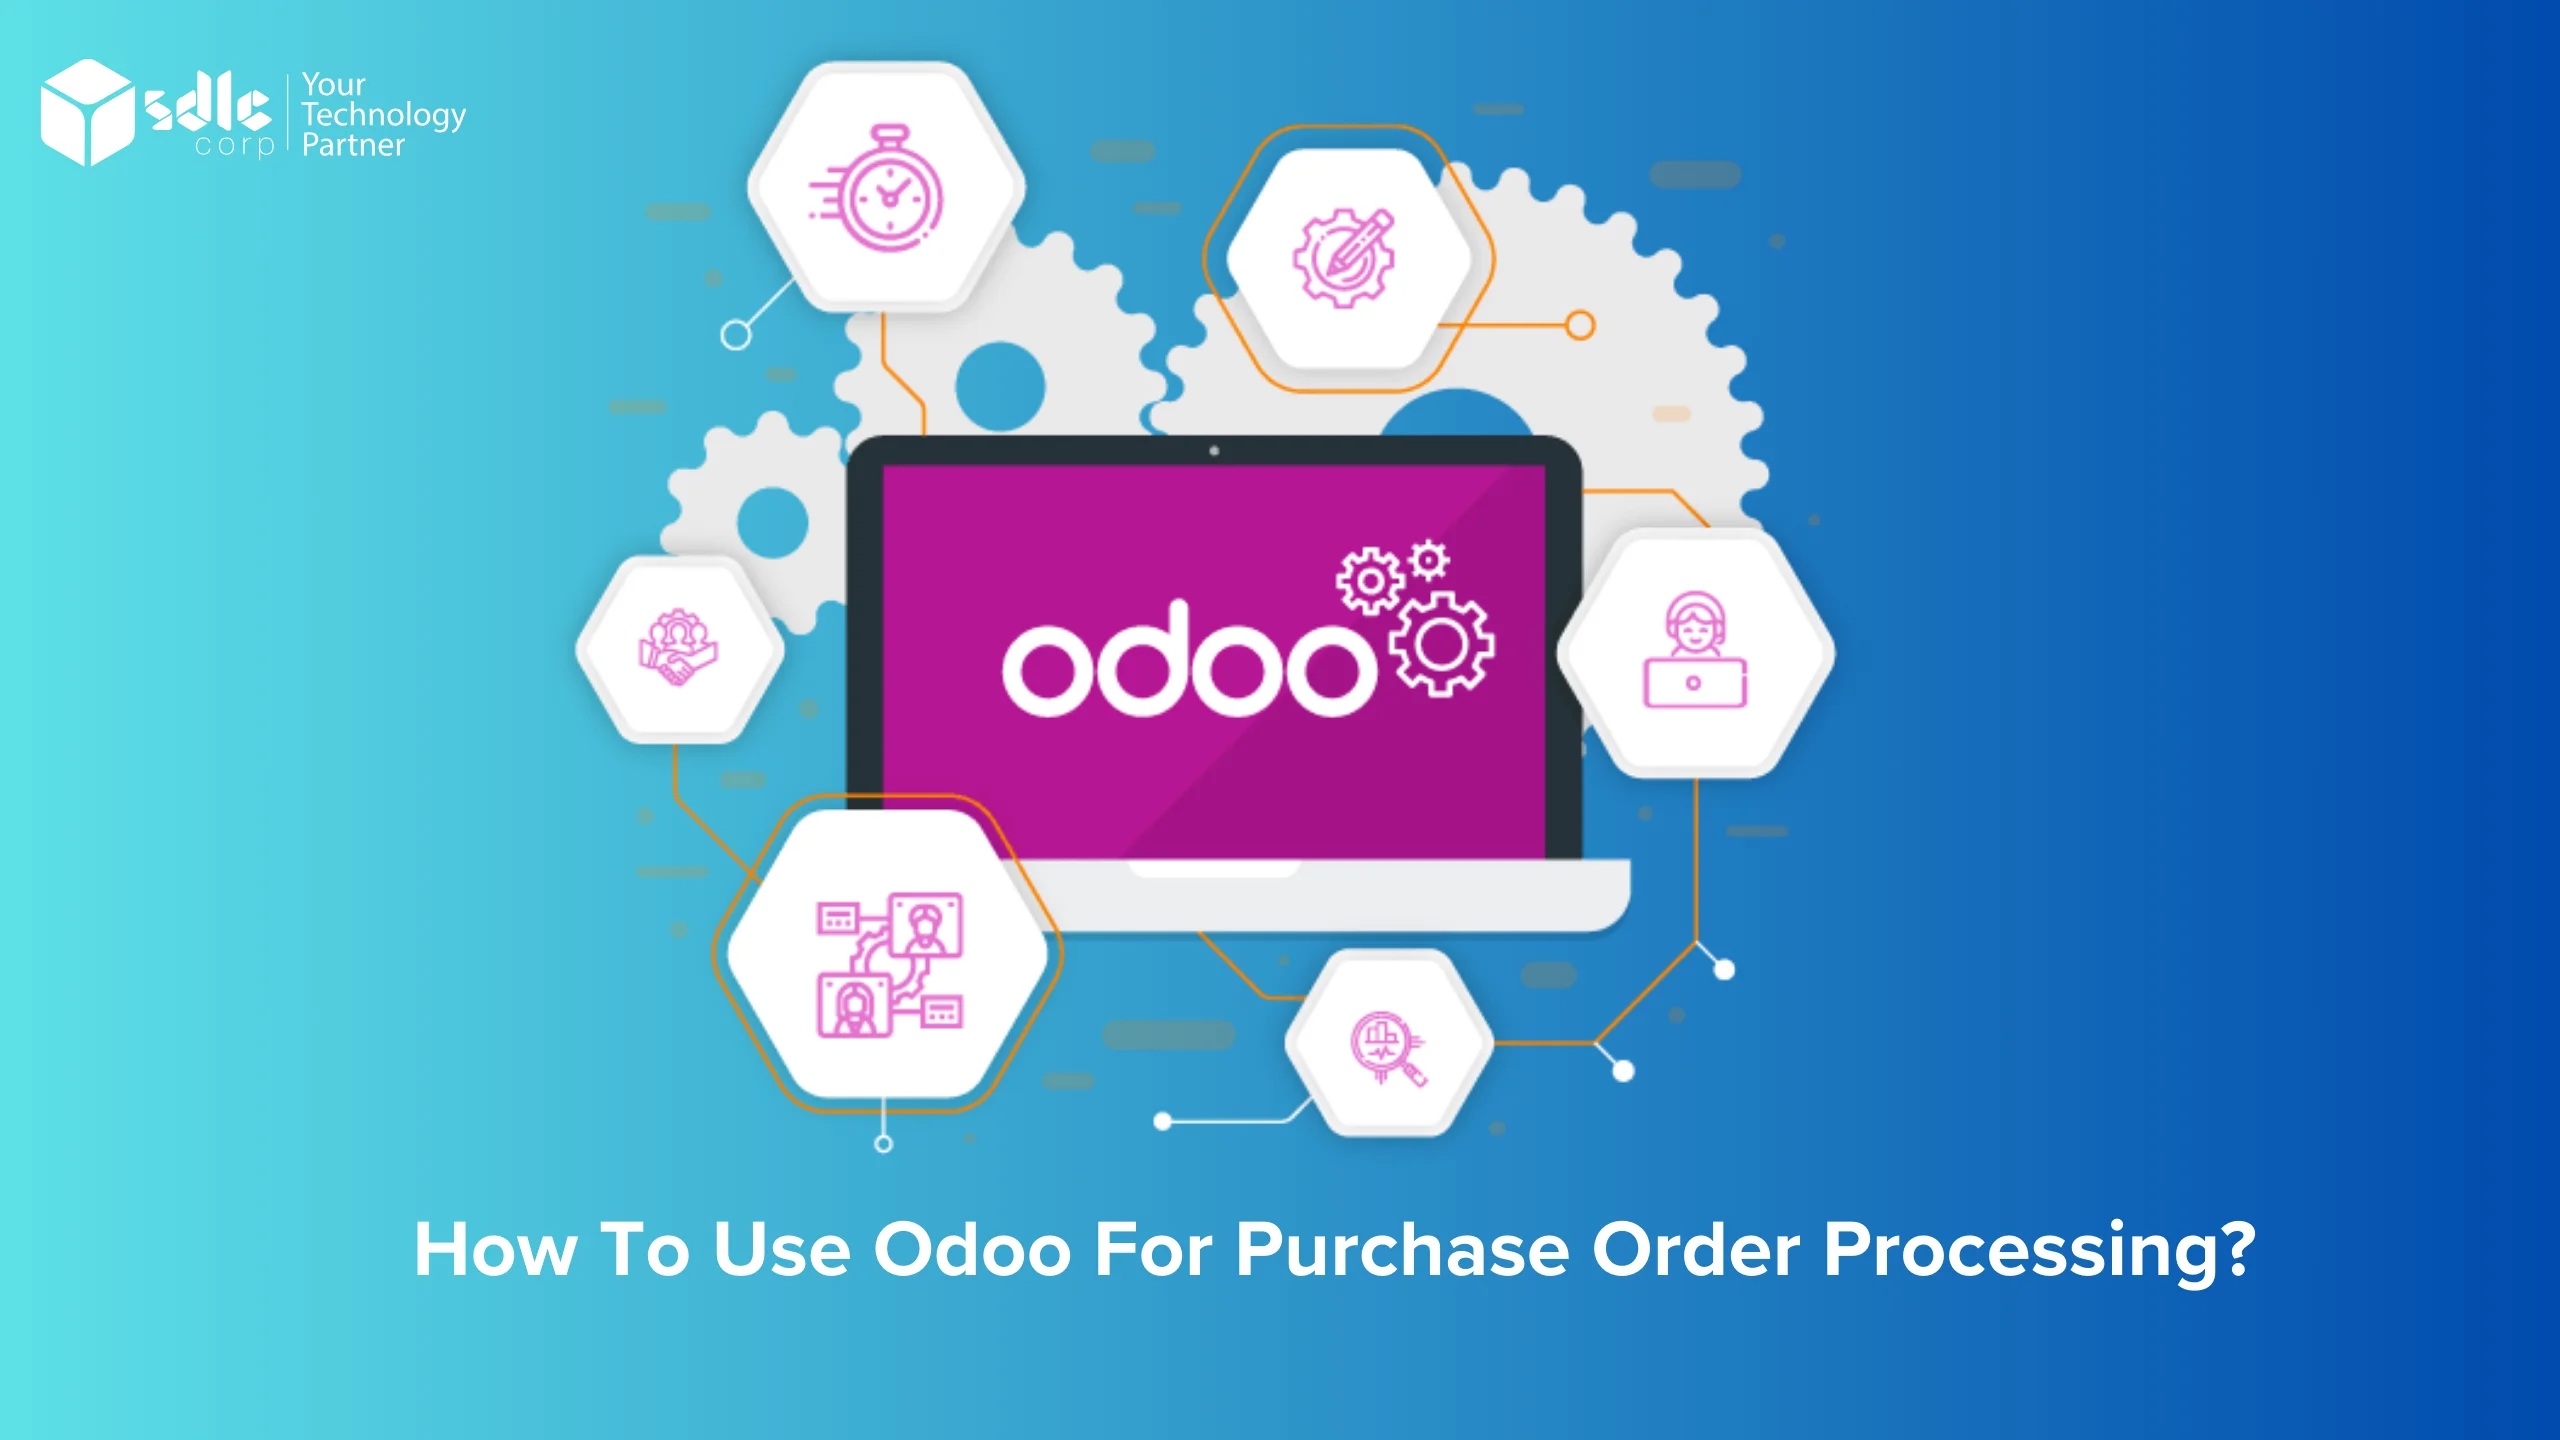 How to Use Odoo for Purchase Order Processing